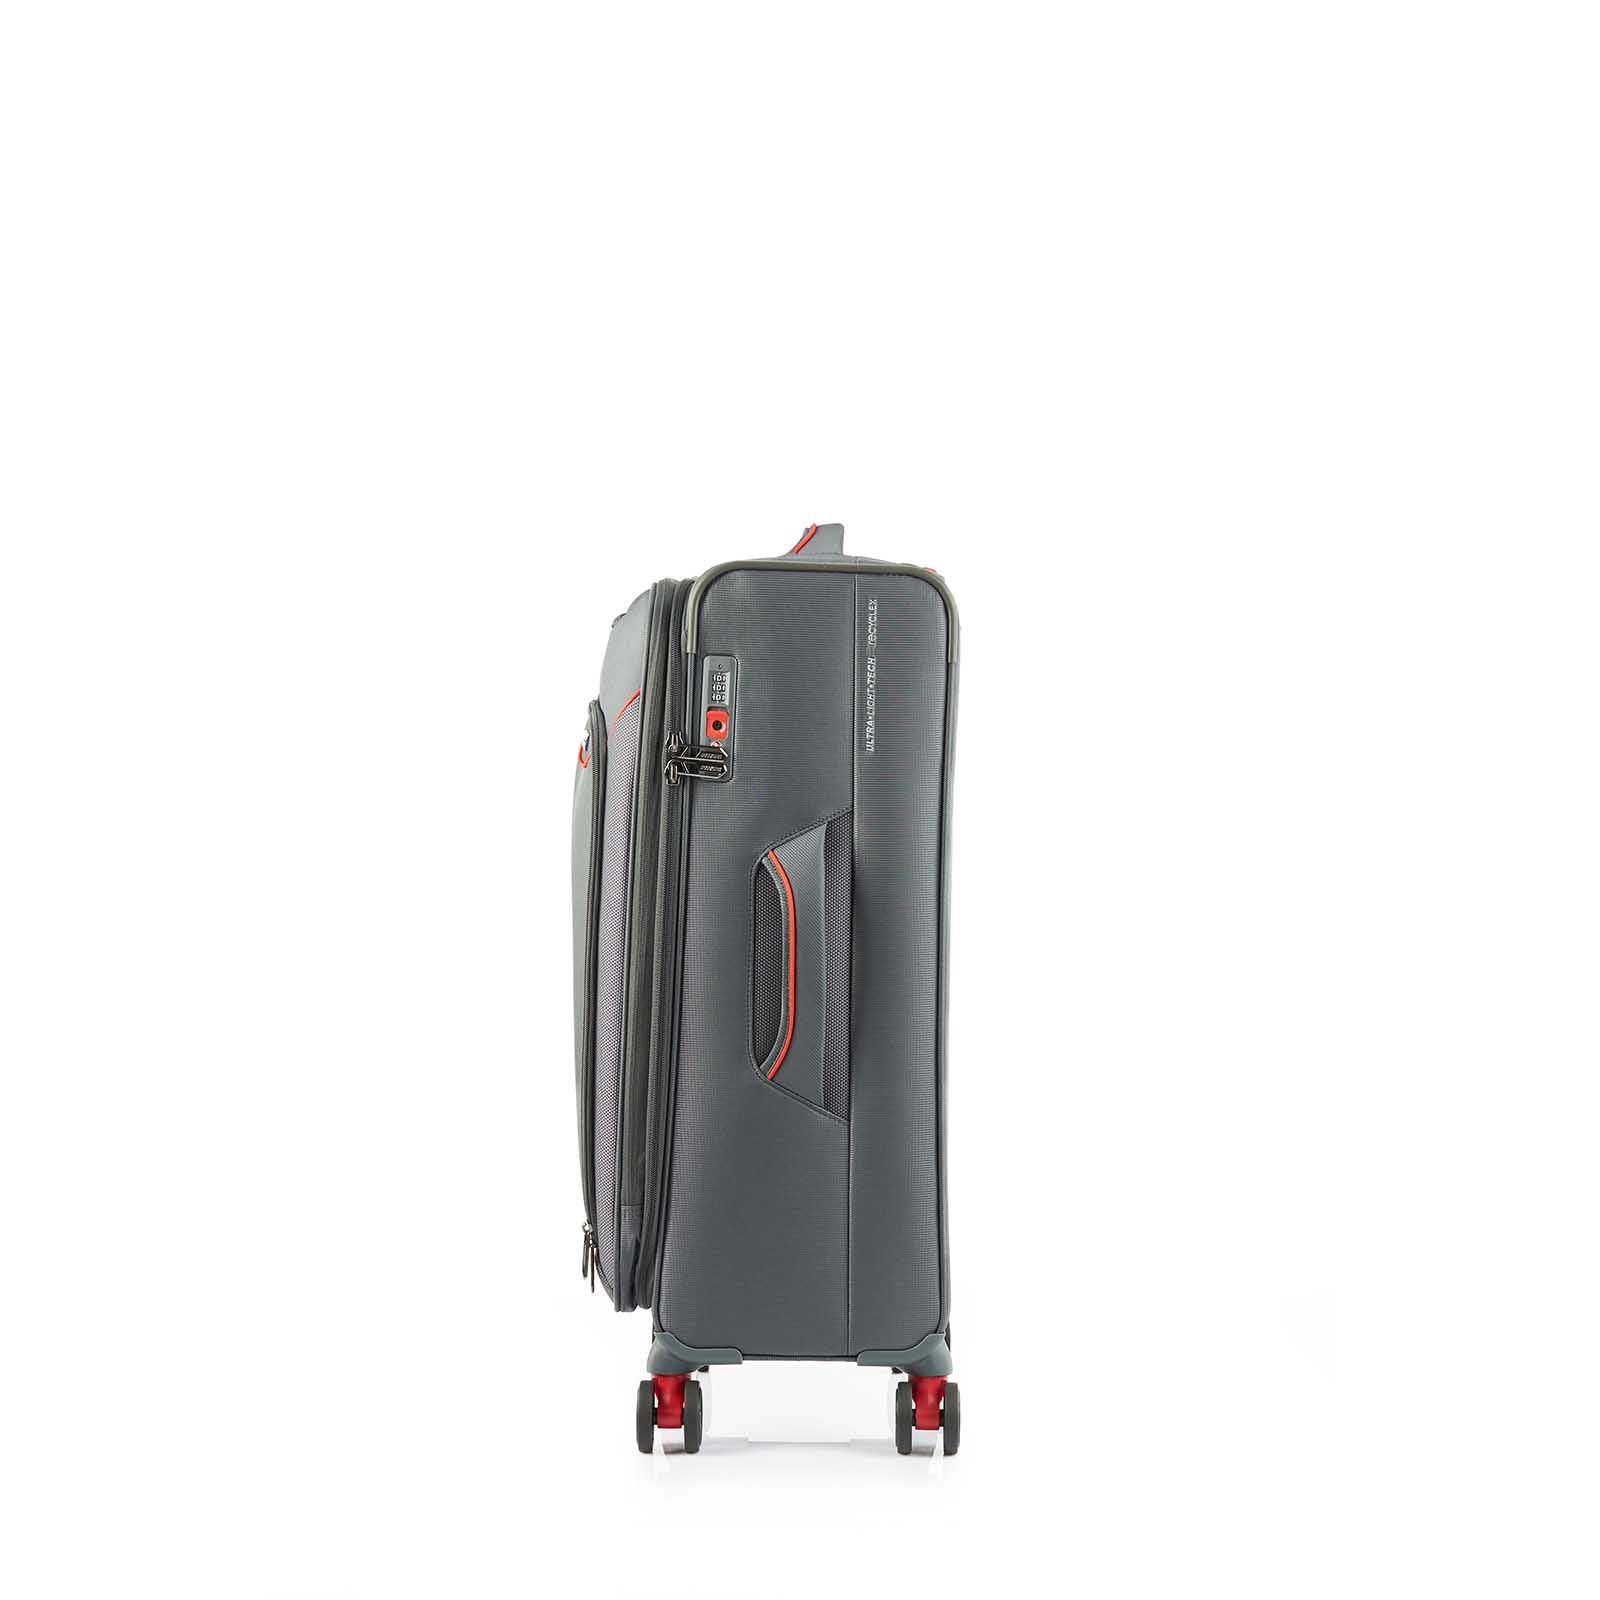 American-Tourister-Applite-4-Eco-71cm-Suitcase-Grey-Red-Side-Handle